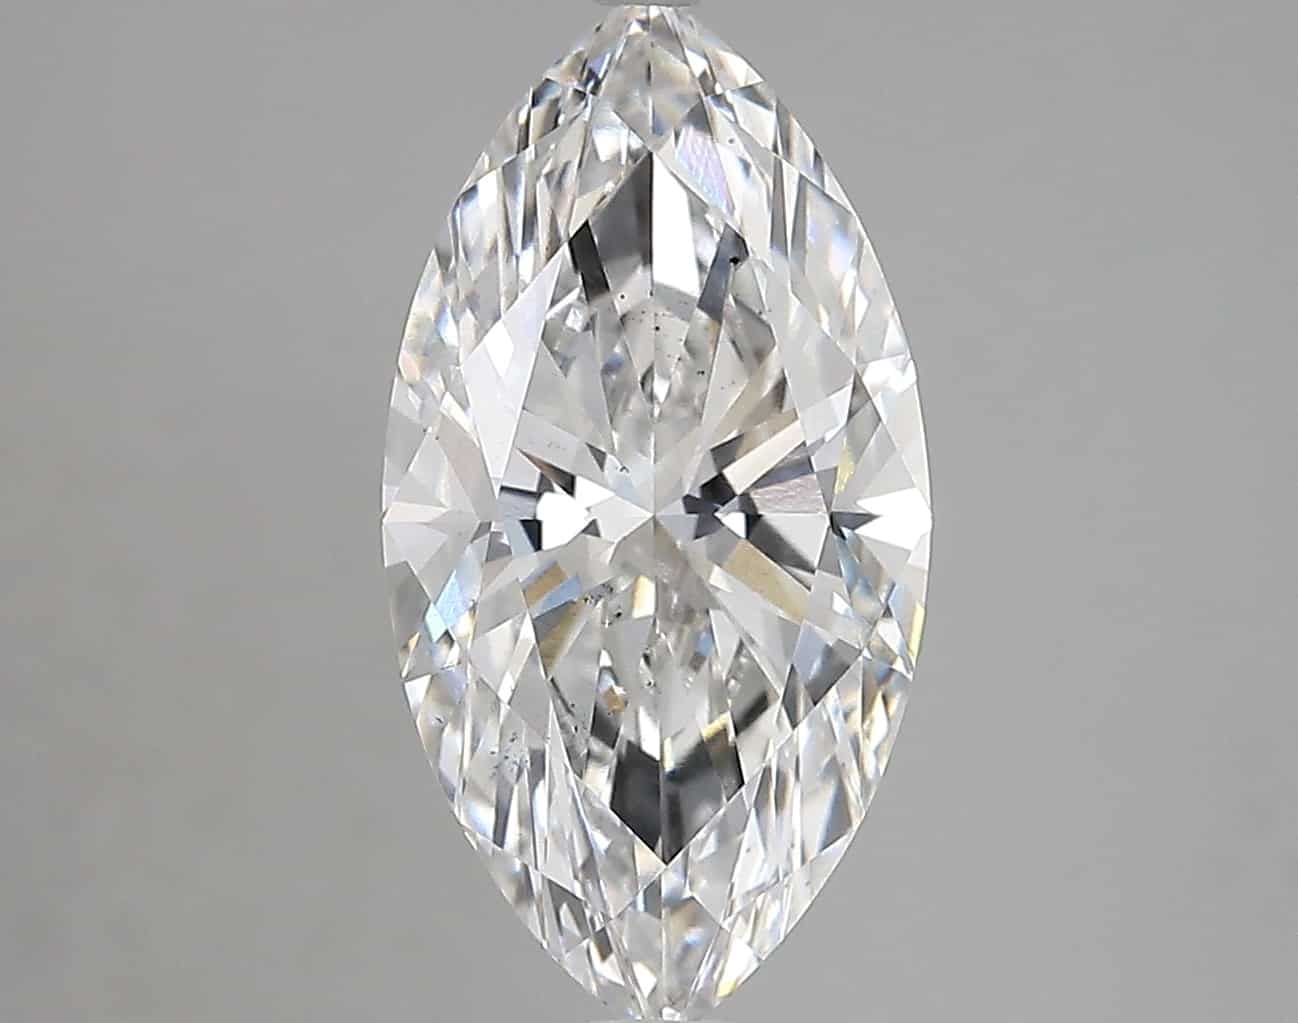 Lab Grown 3.3 Carat Diamond IGI Certified si1 clarity and F color